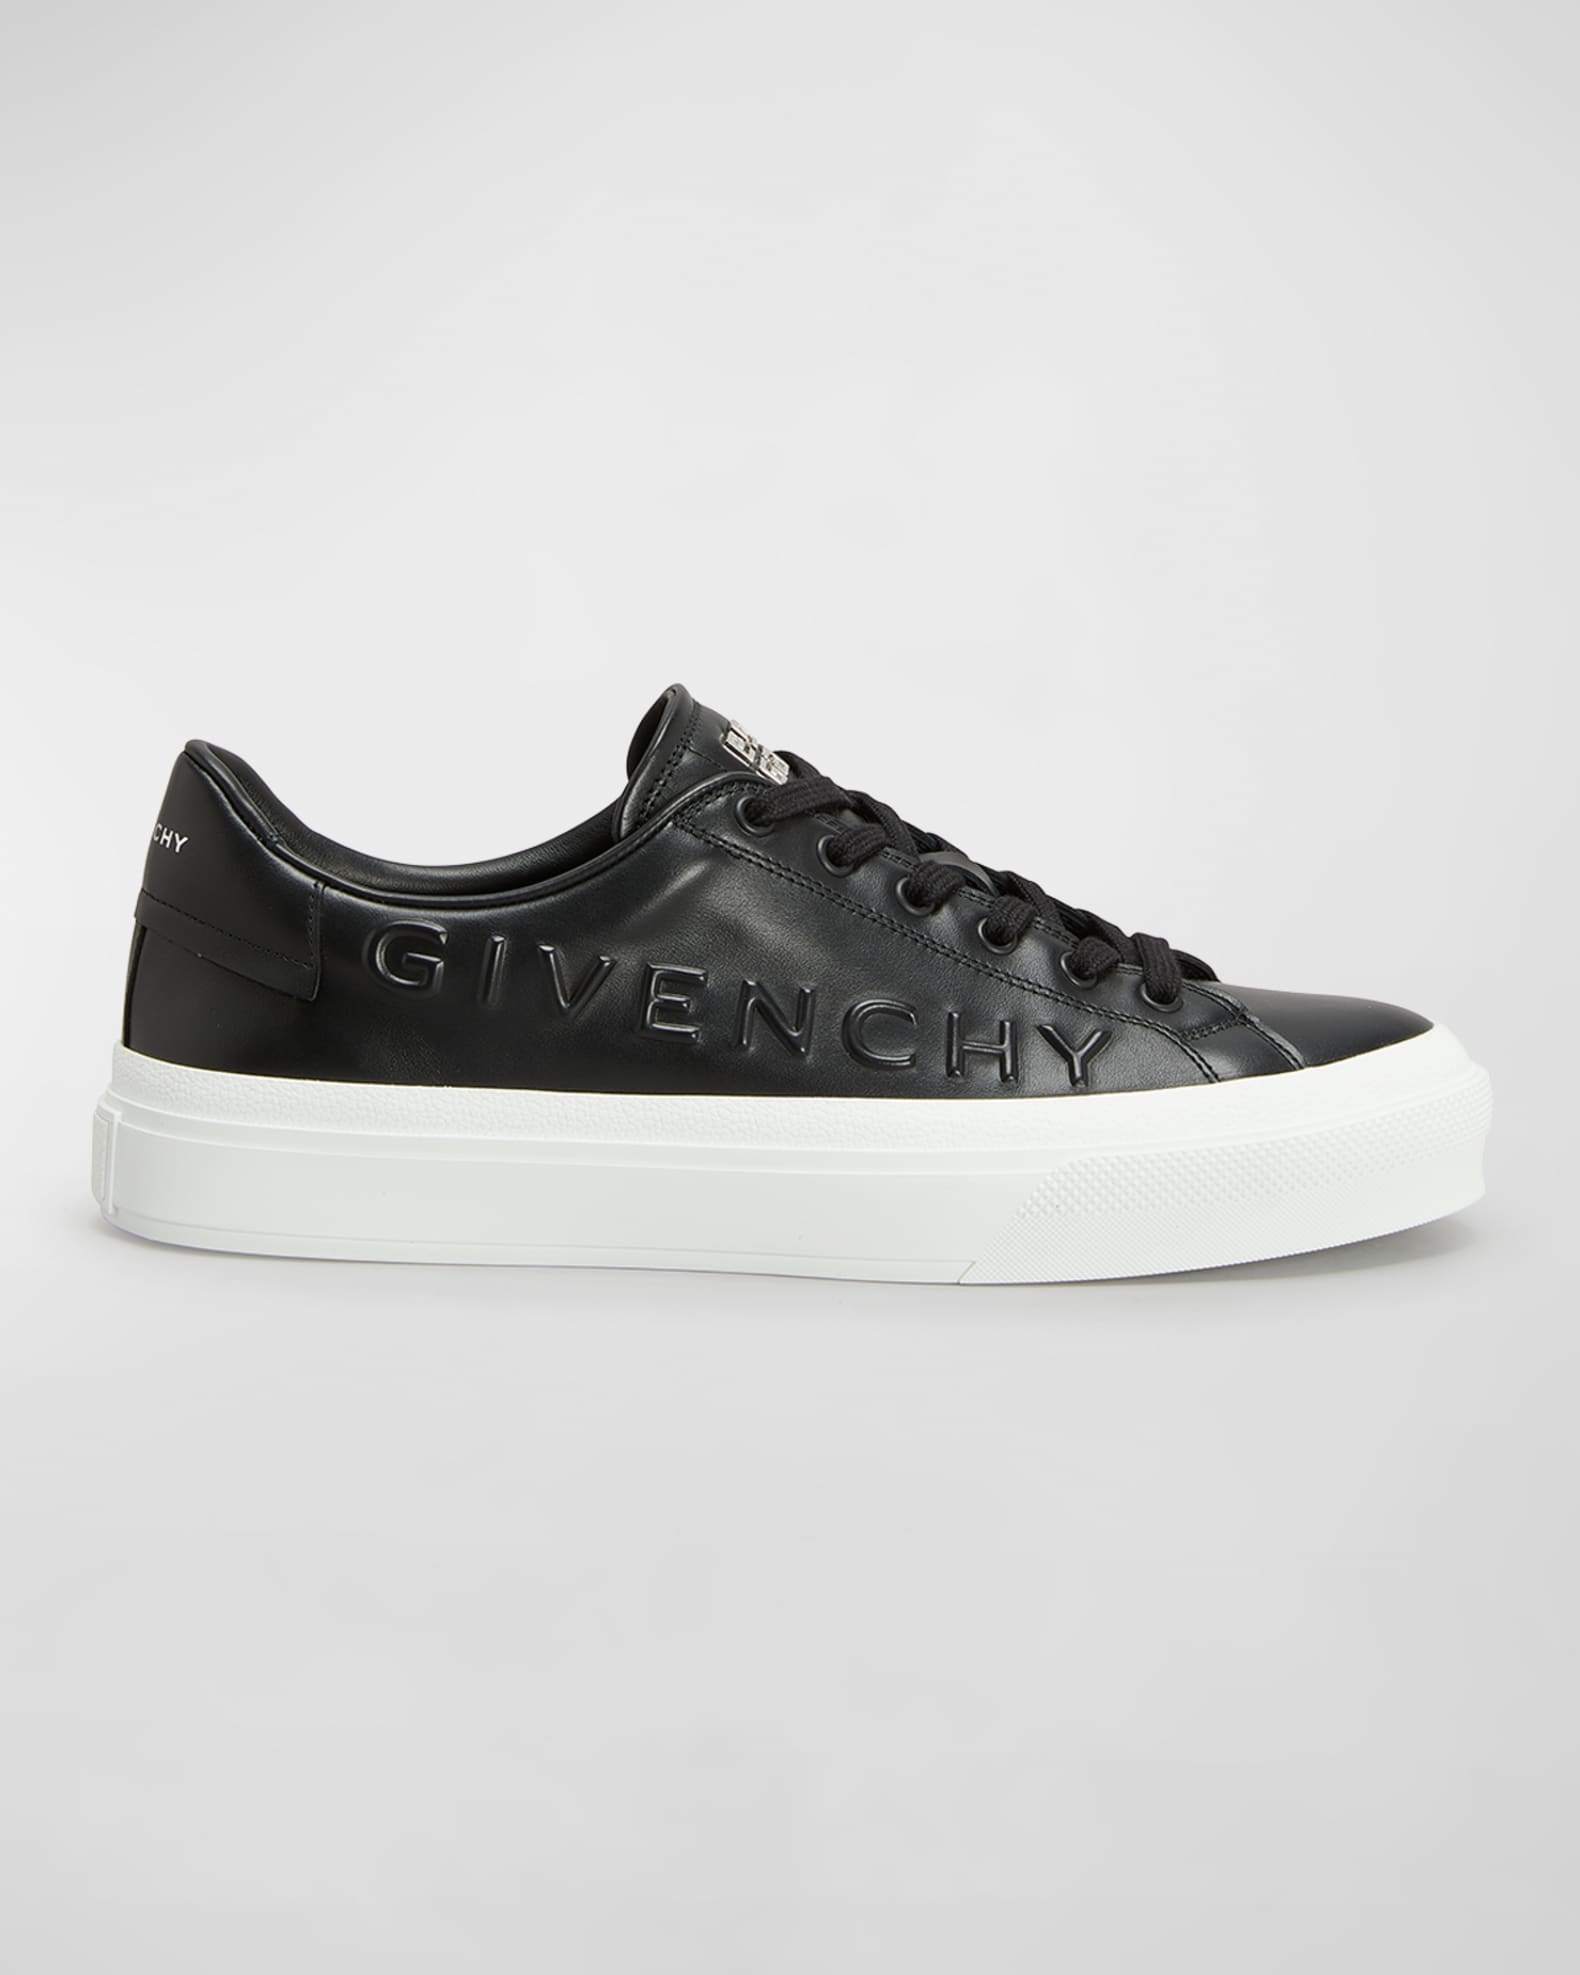 Givenchy Men's City Sport Leather Low-Top Sneakers | Neiman Marcus